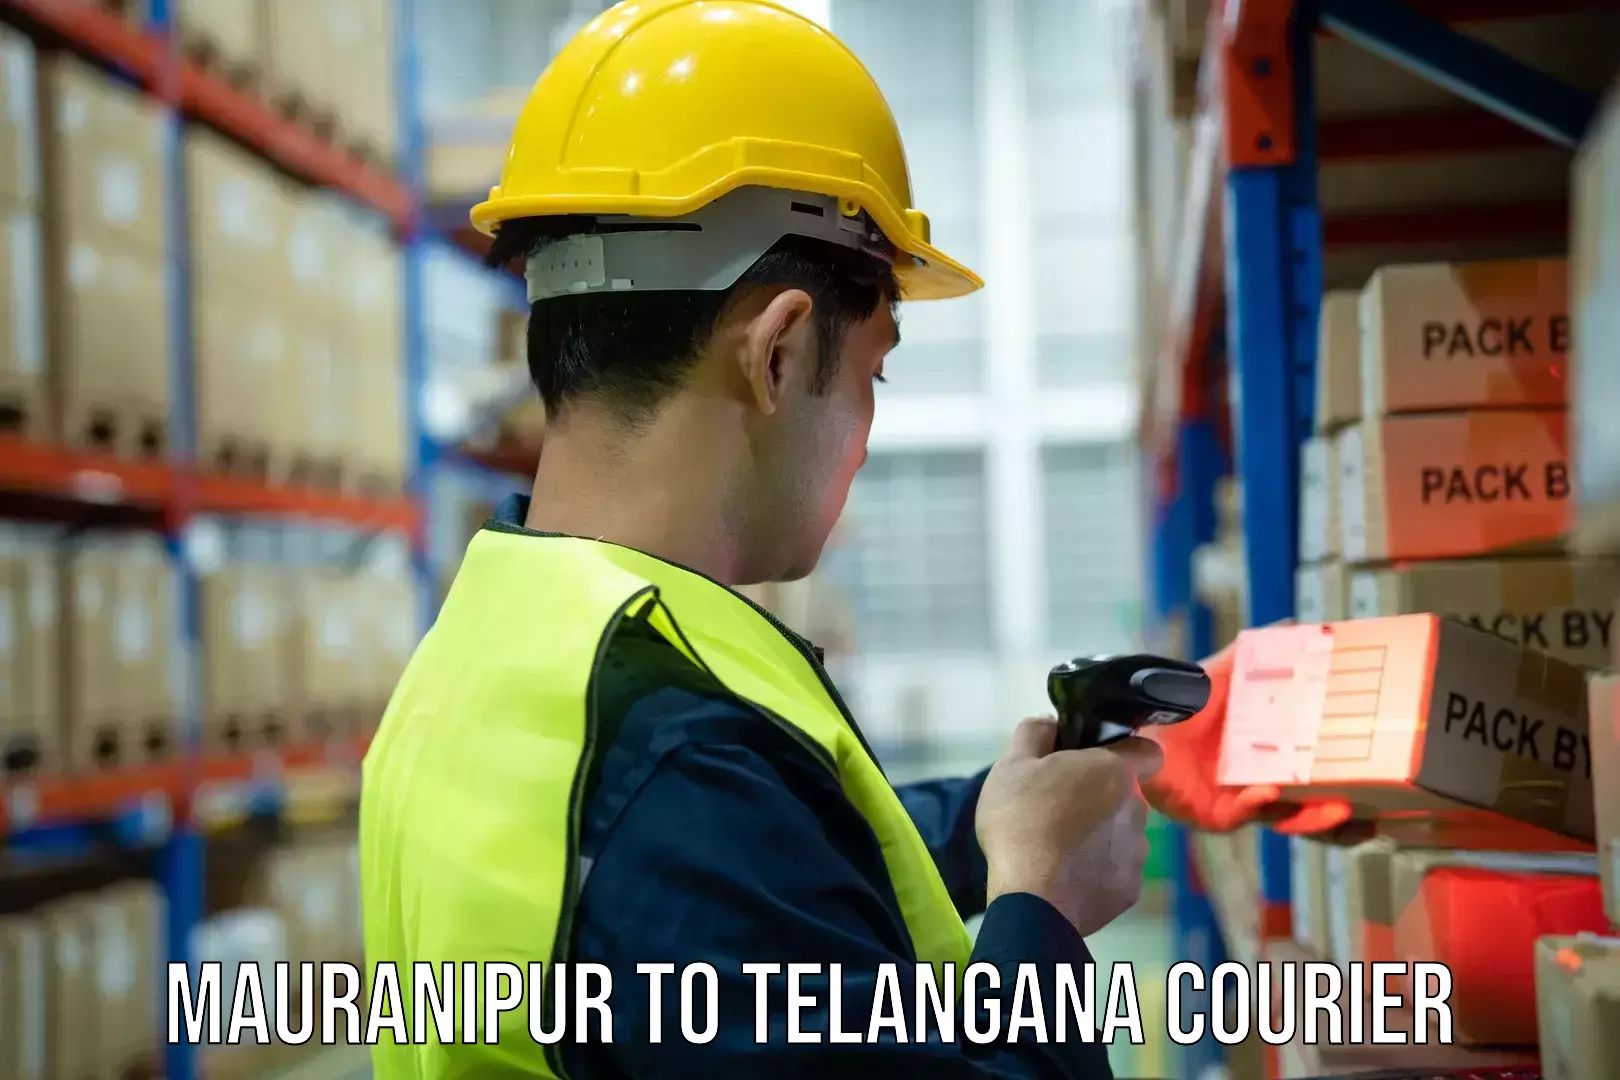 Same-day delivery solutions Mauranipur to Telangana